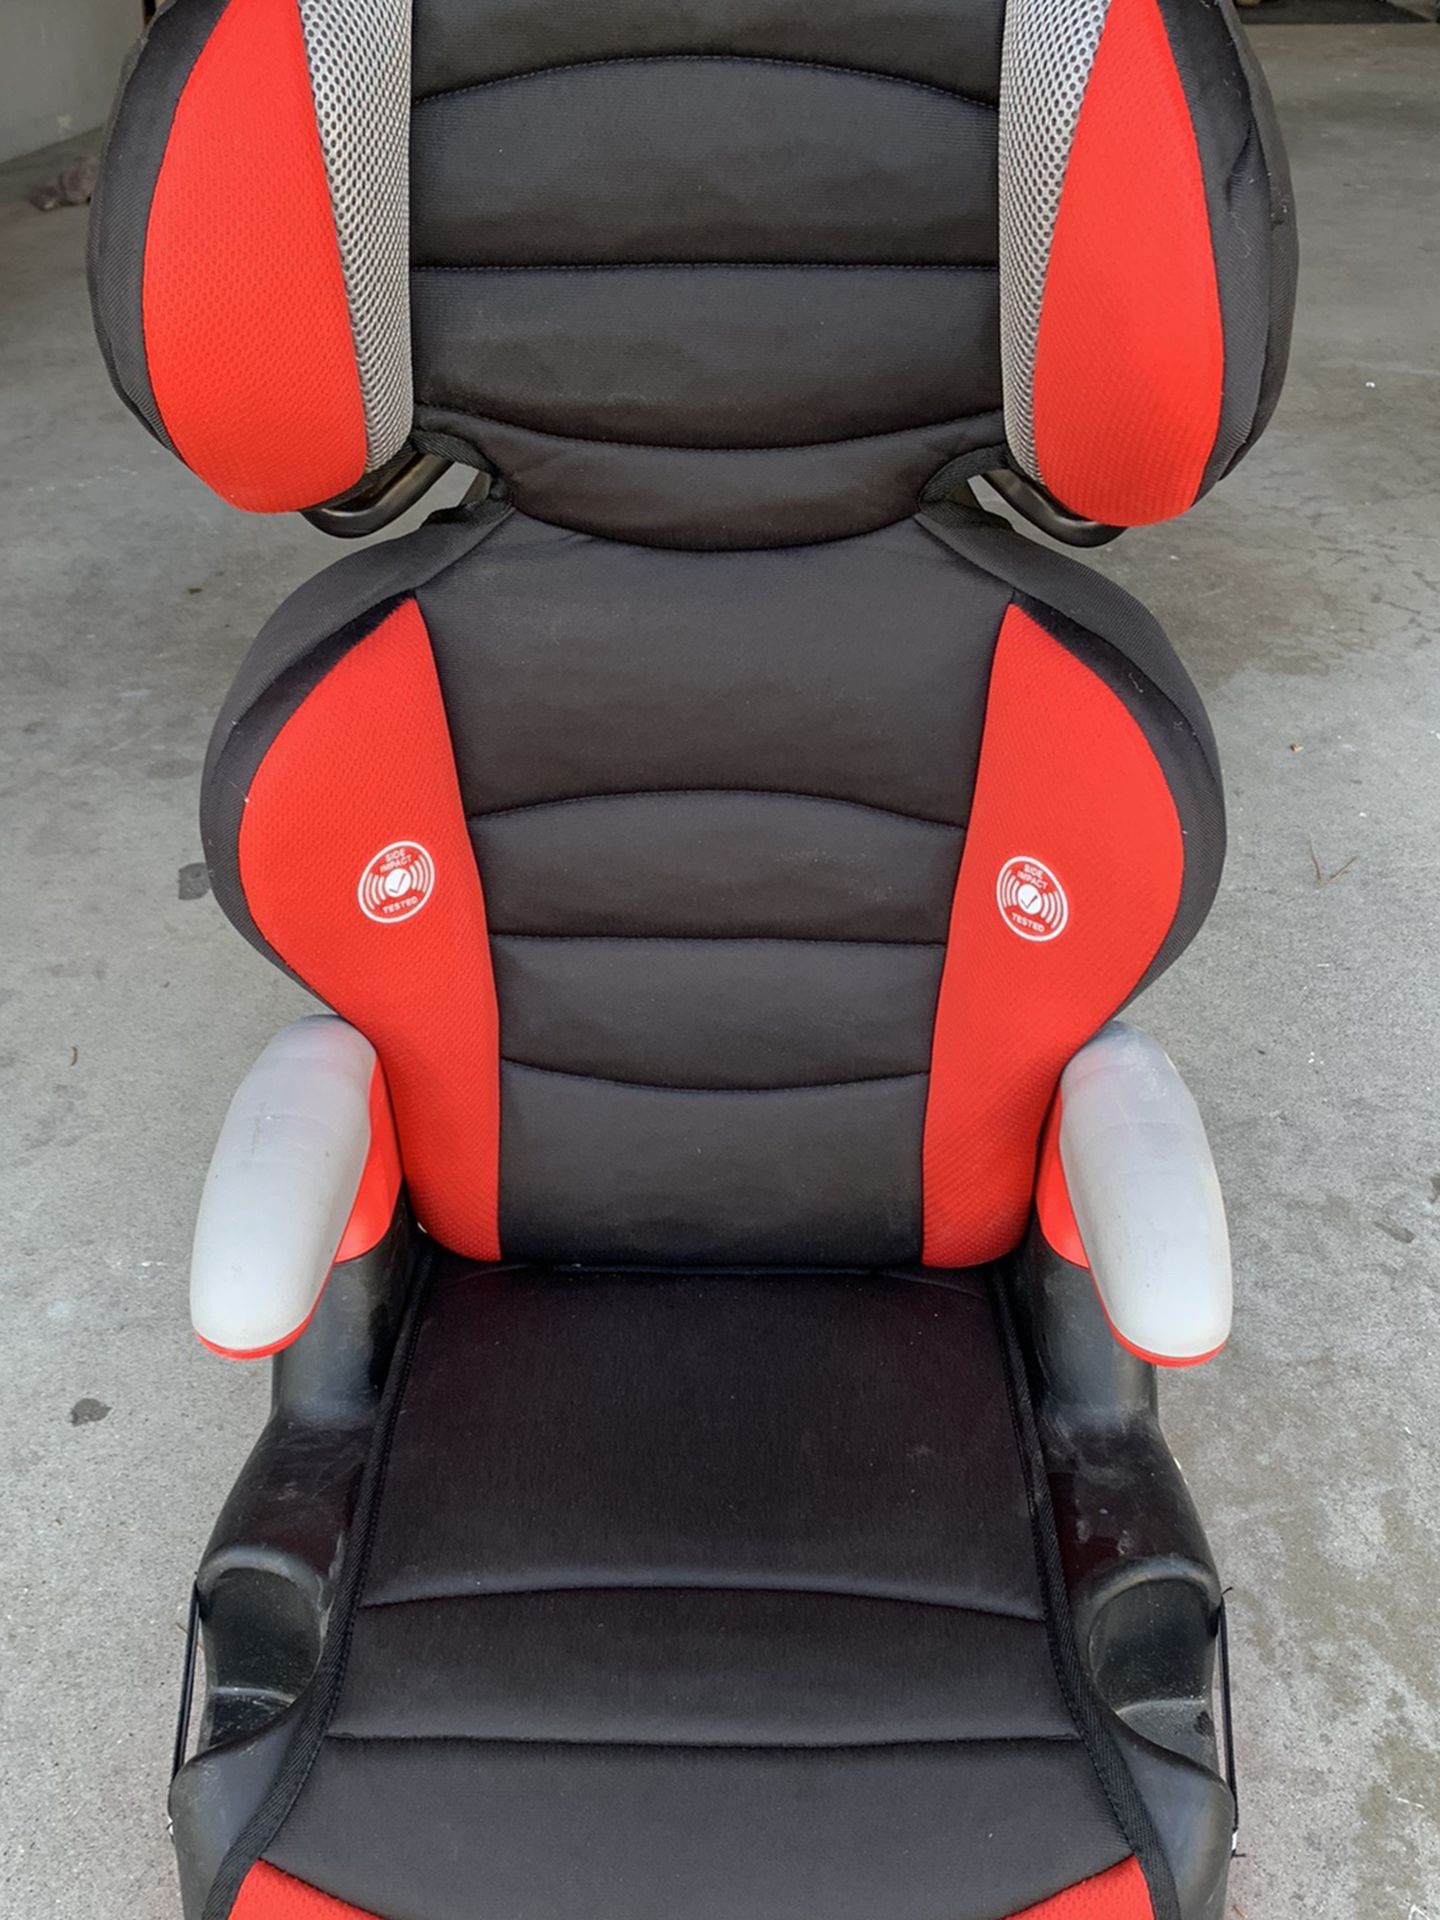 EvenFlo Booster Car Seat